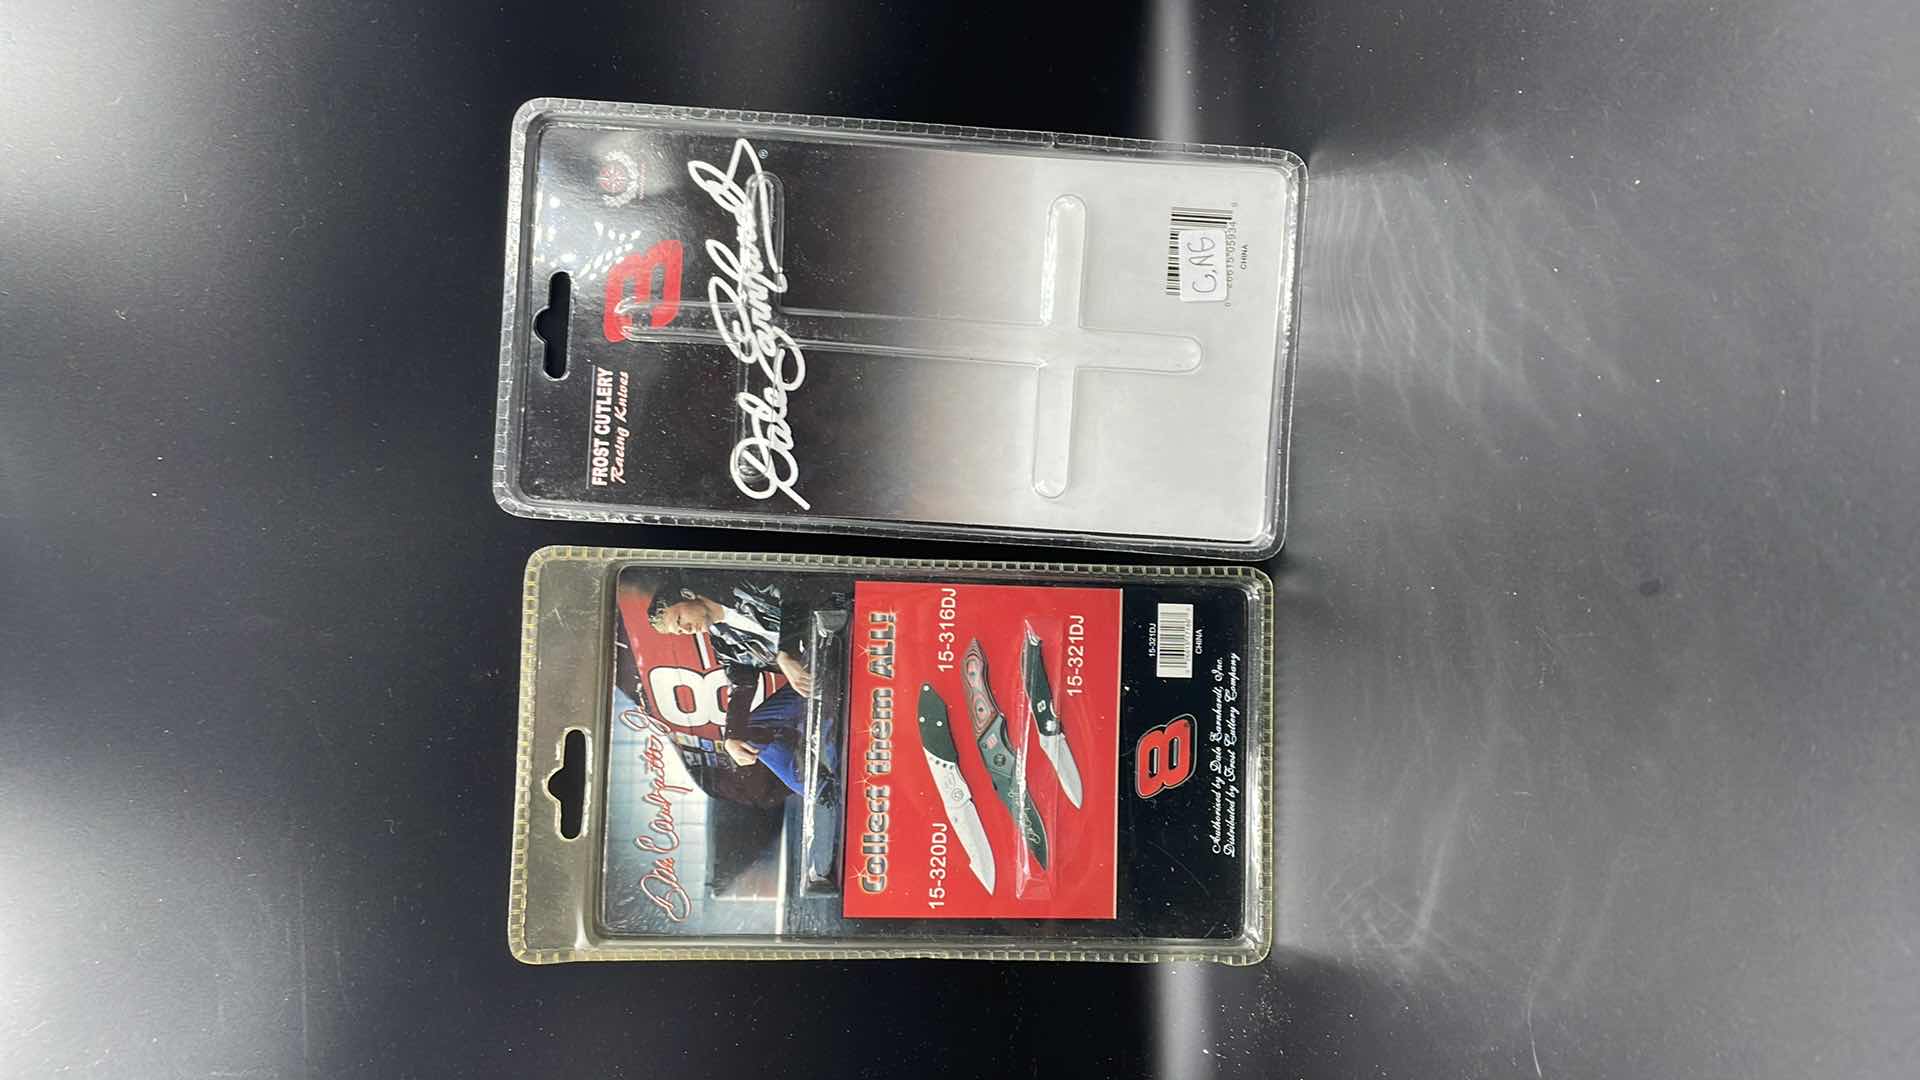 Photo 2 of DALE EARNHARDT SWISS ARMY TYPE KNIFE AND POCKET KNIFE